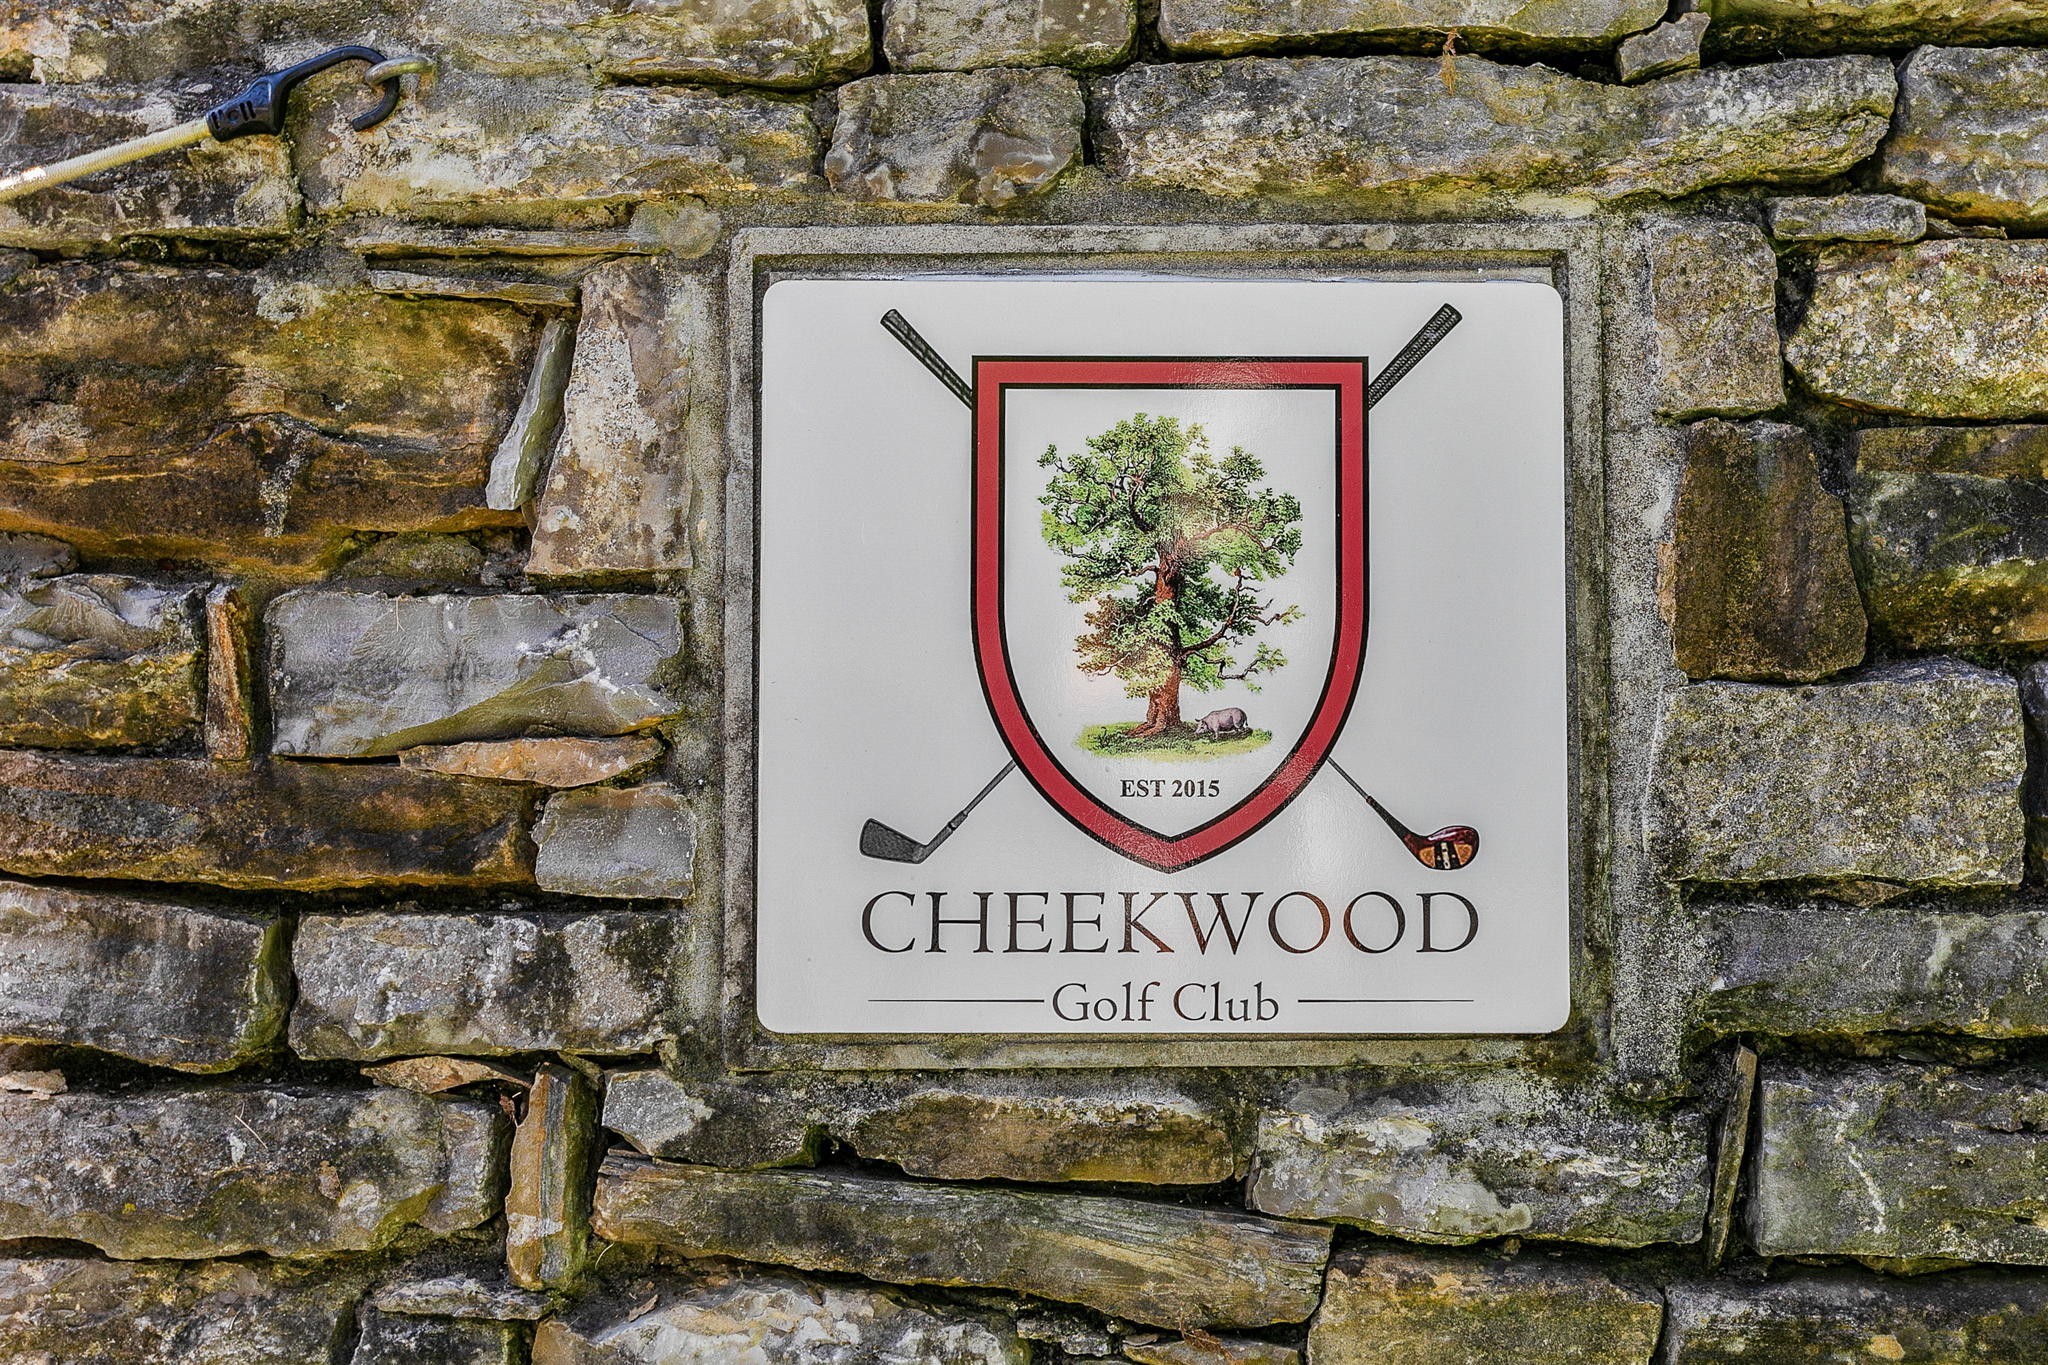 CAN YOU NAME THE 3 MISSING CLUBS IN - Cheekwood Golf Club